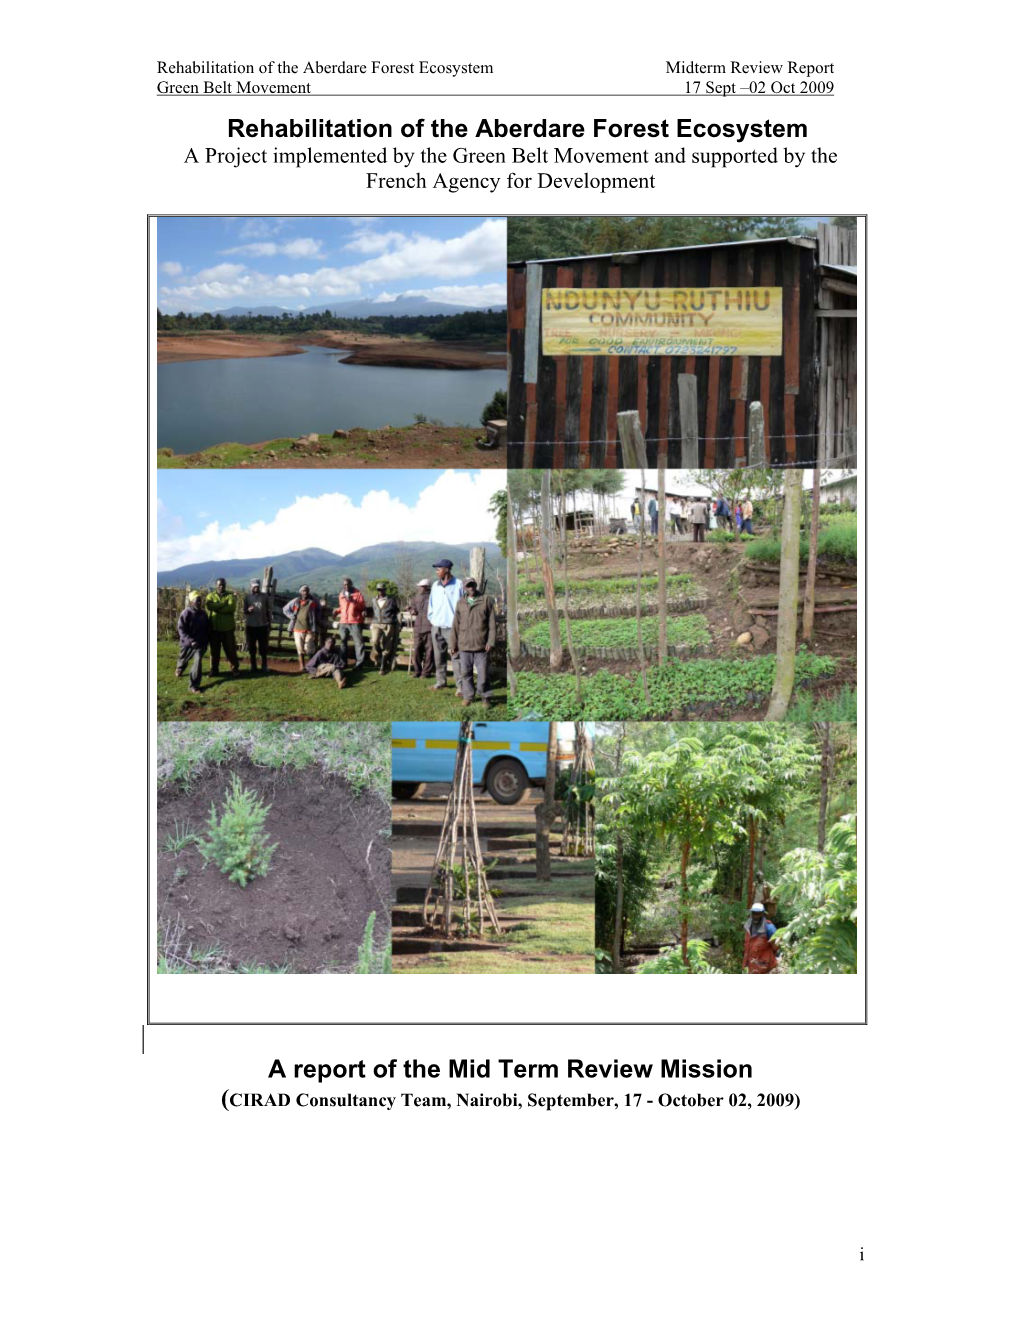 Rehabilitation of the Aberdare Forest Ecosystem a Report of the Mid Term